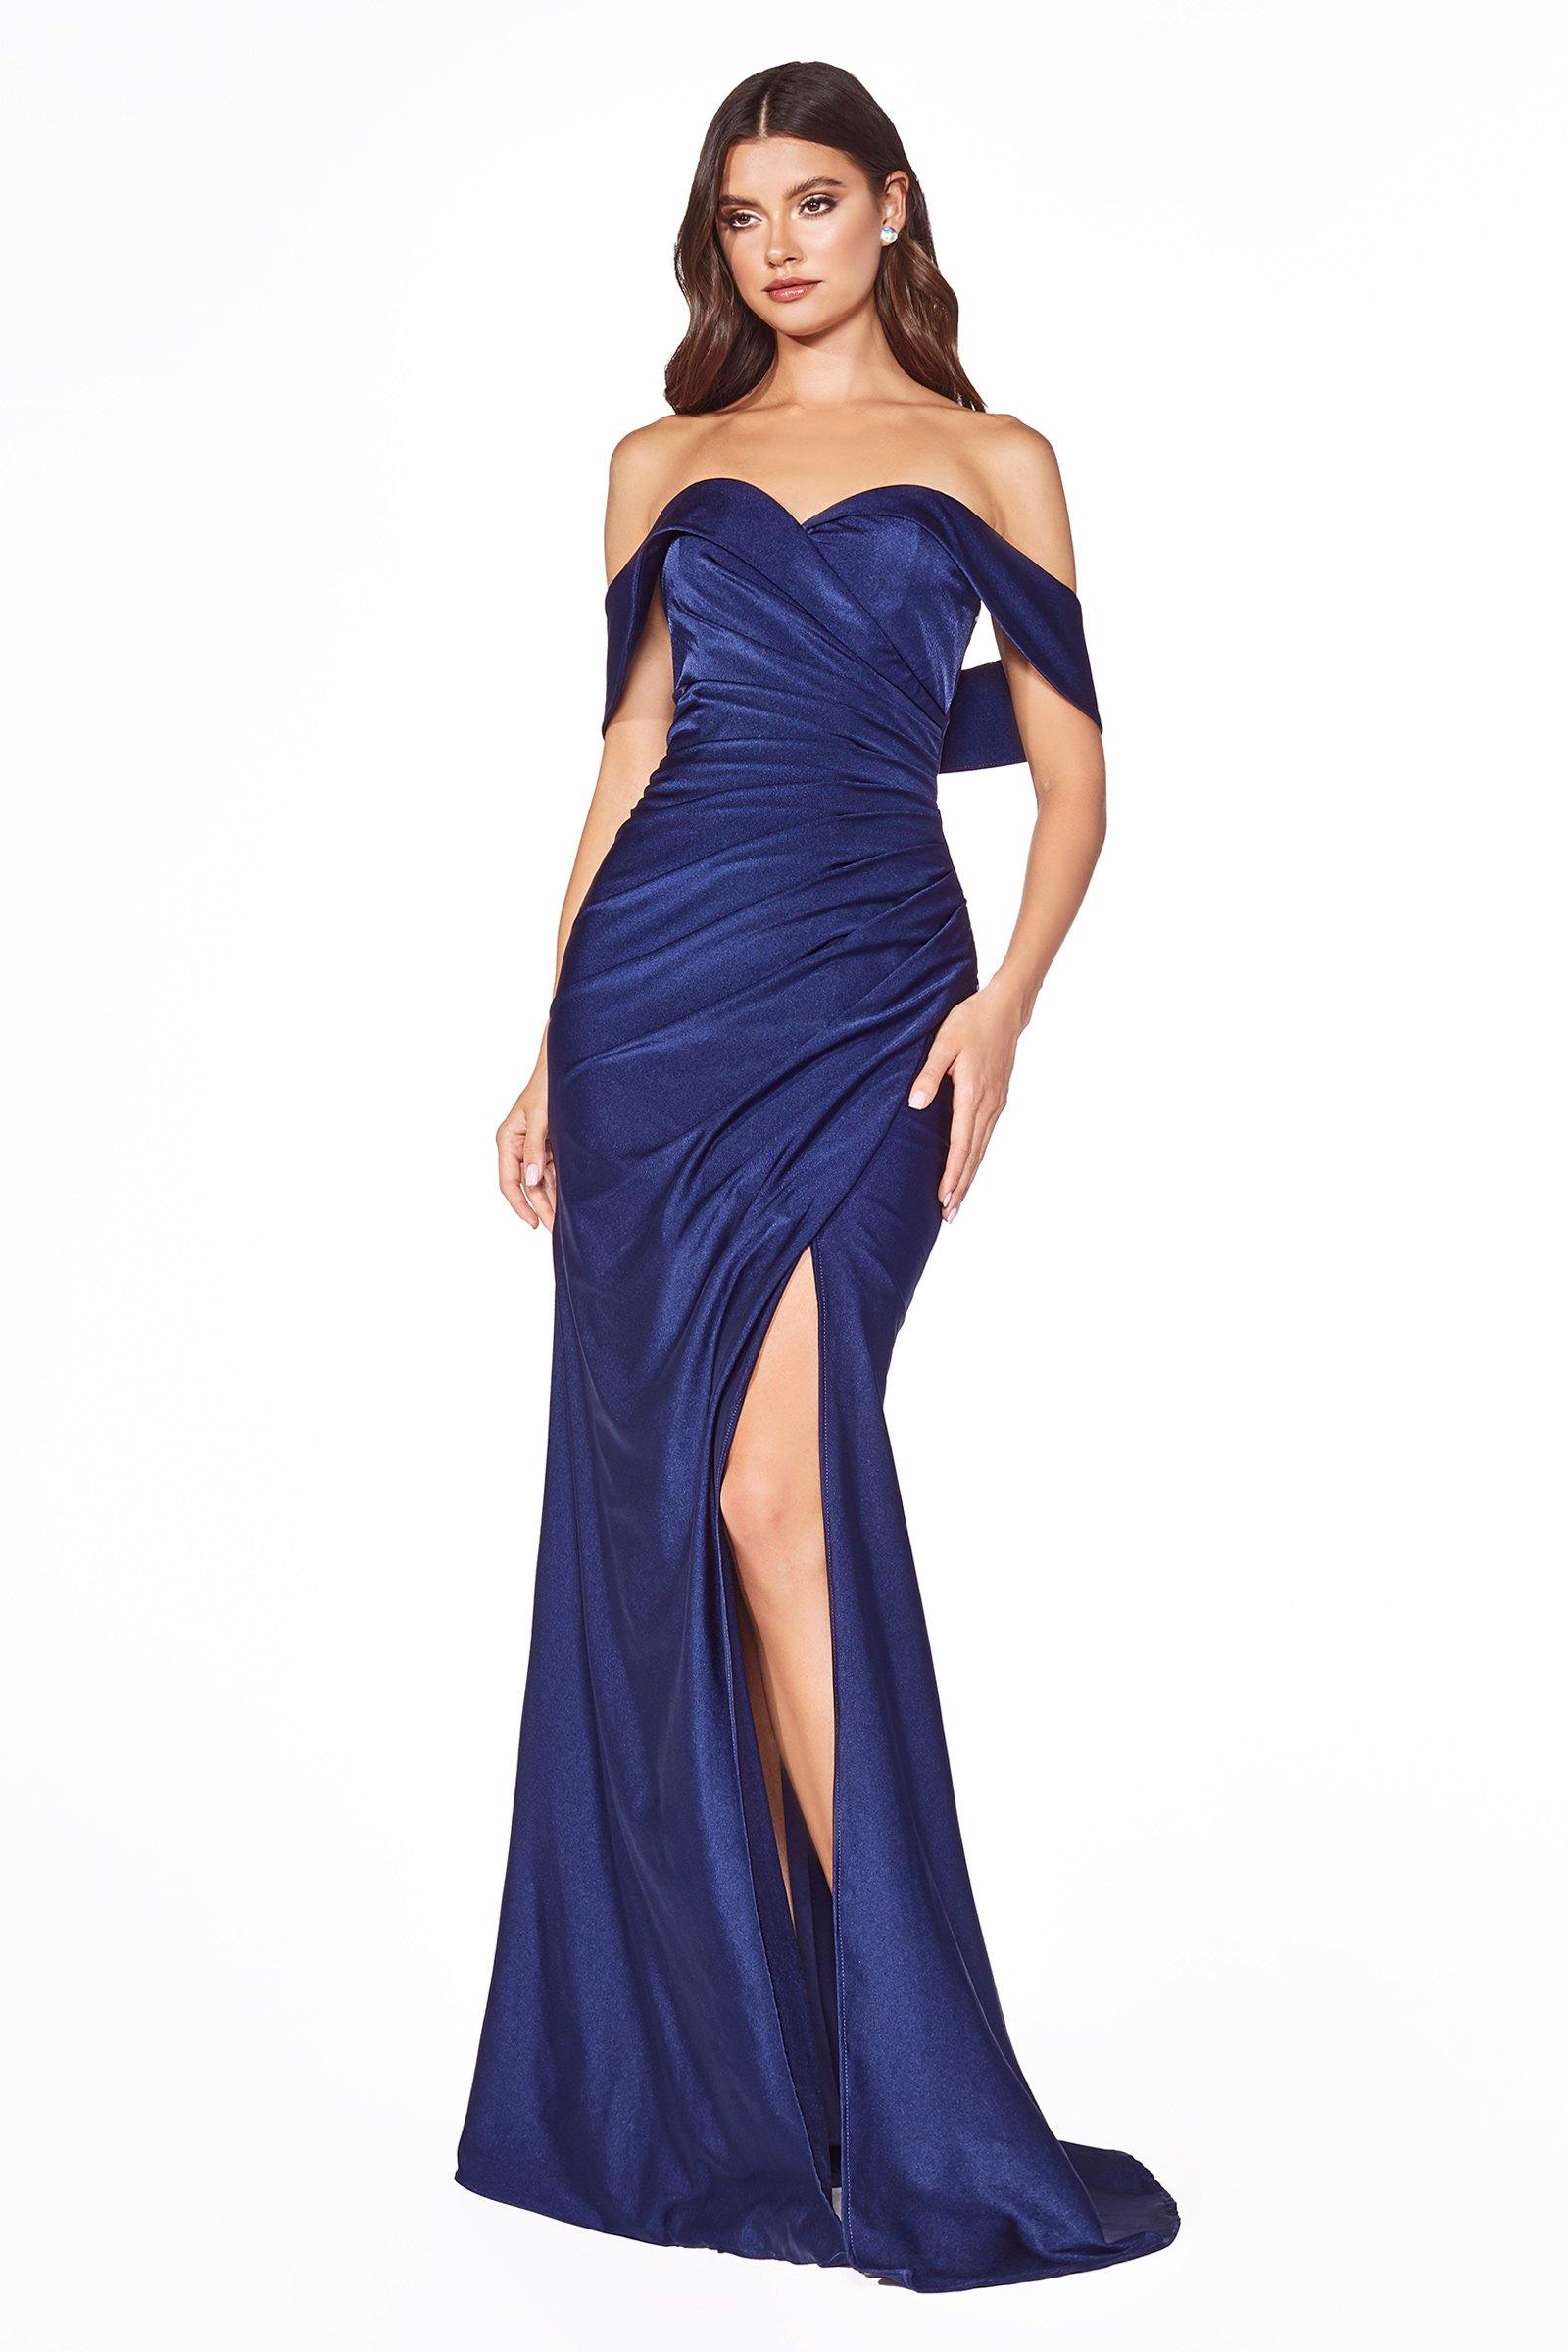 Long Off Shoulder Fitted Evening Prom Dress Navy